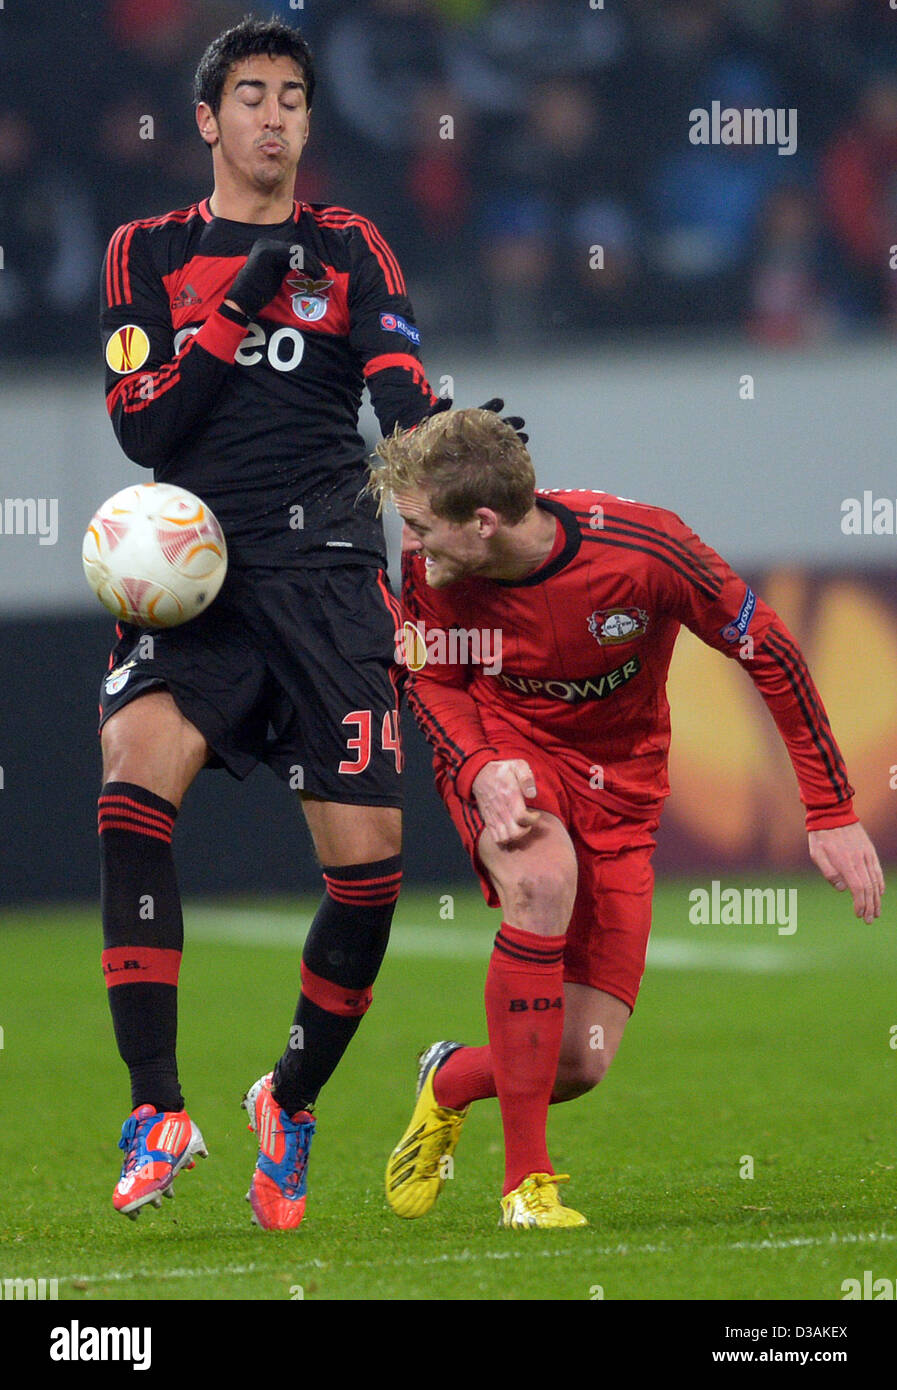 Leverkusen's Andre Schuerrle (R) and Andre Almeida of Benfica vie for the ball during the UEFA Europa League round of 32 first leg soccer match between Bayer Leverkusen and Benfica Lisbon at at BayArena stadium in Leverkusen, Germany, 14 February 2013. Photo: Federico Gambarini/dpa +++(c) dpa - Bildfunk+++ Stock Photo